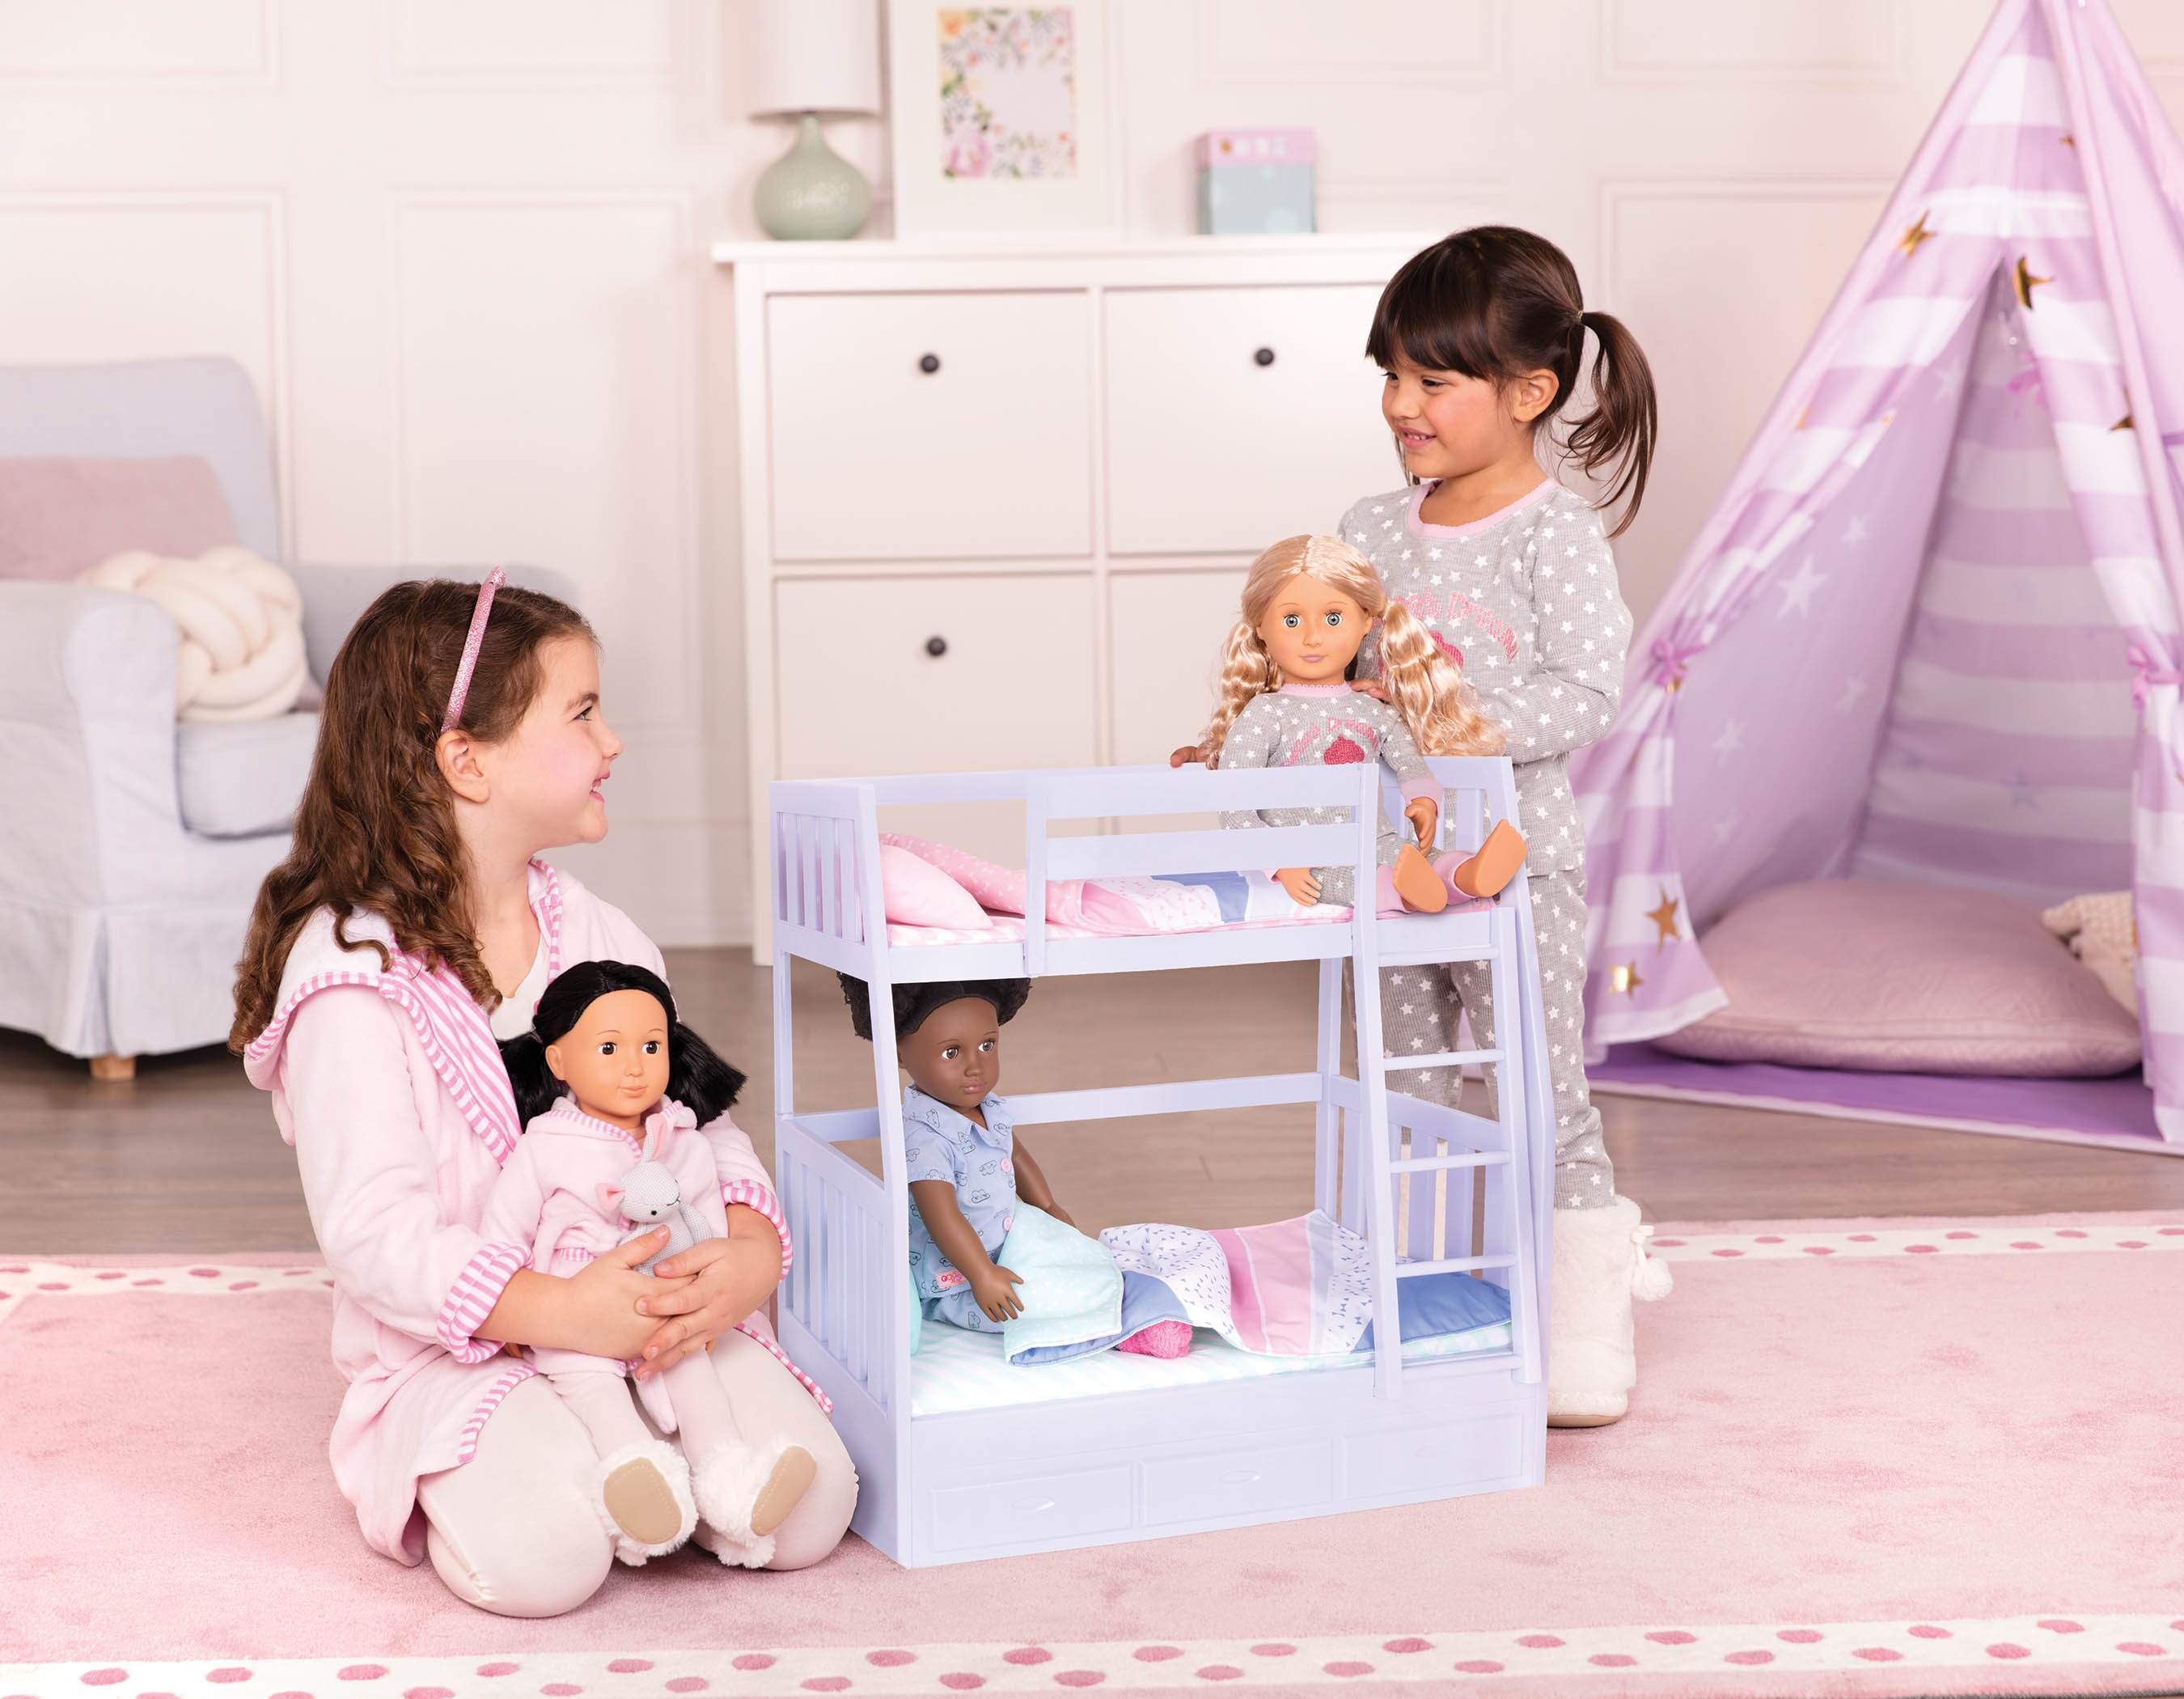 12 Steps for the Perfect Sleepover - Girls playing with OG Dolls at a Sleepover